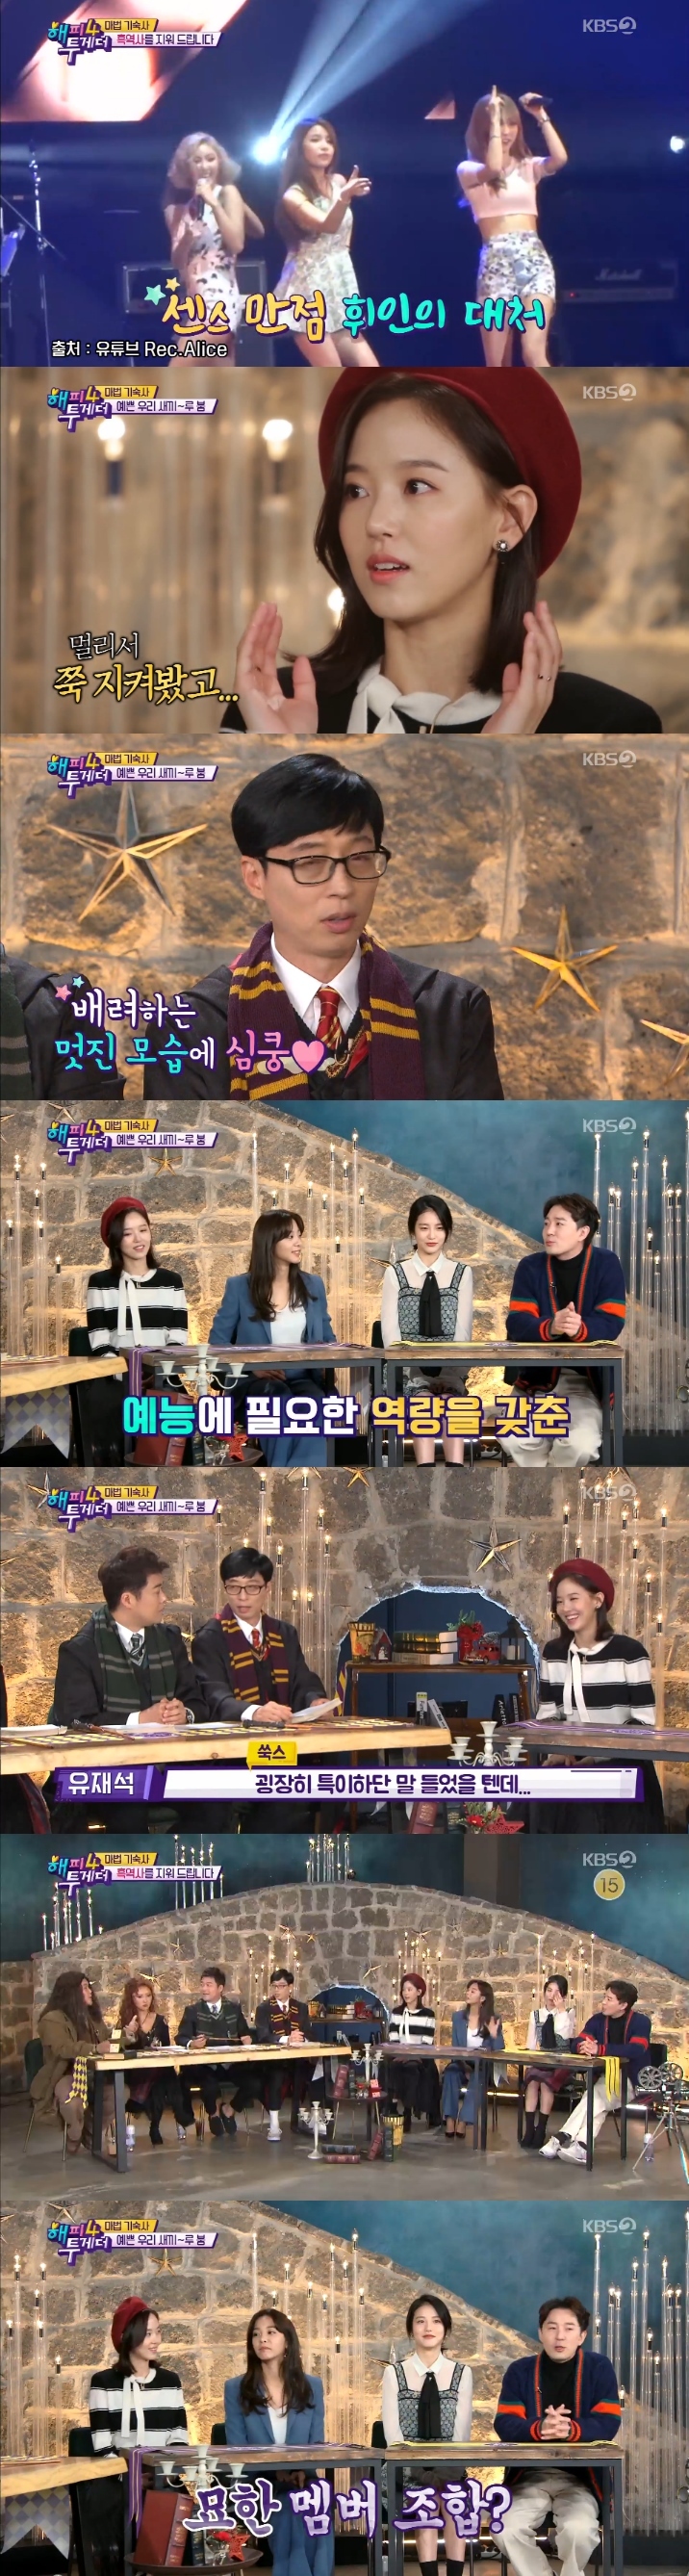 Seoul = = The endless anecdote of the representative of the entertainment industry, Hattoo gave fun.In KBS2 Happy Together 4 broadcasted on the night of the 29th, special MC Hwasa, guest Kang Han-Na, Seol In-ah, Shin Ye Eun and Boom appeared.On this day, especially the guests mentioned various people, released the story, conveyed the anecdote, and added warmth and fun.First, Kang Han-Na told an anecdote toward Yoo Jae-Suk.When I was a kid, I saw grasshoppers and I was against Yoo Jae-Suk, Kang Han-Na said, Confessions.I was so upset when I married, he added, expressing his affection.Hwasa mentioned member Whine, who had guarded him from black history; Hwasa mentioned the dizzying events on stage, saying: I like Holternek, I was on stage and it was unravelled.Whiin, who caught up with singing and noticed, quickly tied him up and escaped the crisis, Hwasa said. I can laugh and talk because Im not exposed.Heo Young-ji and a trainee comrade, Seol In-ah said, adding: We both had a good diet, and instead of dinner, we were given a running mission, just being out was happy.While I was exercising outside in the air, I was excited about the poisonous manor. I took something out of my pocket and it was sushi. Kang Han-Na expressed affection, saying she had goed to the show a while ago referring to her friendship with IU. Seol In-ah also commented on IU.Seol In-ah said, I was an anti-fan of IU. I was so surprised at first, I was staring at him.He kept breathing and kept practicing with me for the first time. Seol In-ah also told me about Kang Ha-neul, who said, I had a lot of stories and high expectations before I met Kang Ha-neulBut he was more than expected. If you are Yoo Jae-Suk in the arts, Actor is Kang Ha-neul Boom mentioned Jo Se-hos memory of fainting at a drink, Boom said: Seho did a water show to get the mood up, and then he was electrocuted and fell to the back.Kim Jae-deok, who was with him, fell down. Jo Se-ho replied, What reaction should I do? I like to play fun, so it is true that I sprinkled water with my microphone. It was a little bit of a shimmer.But my friends said that I should have fallen. 